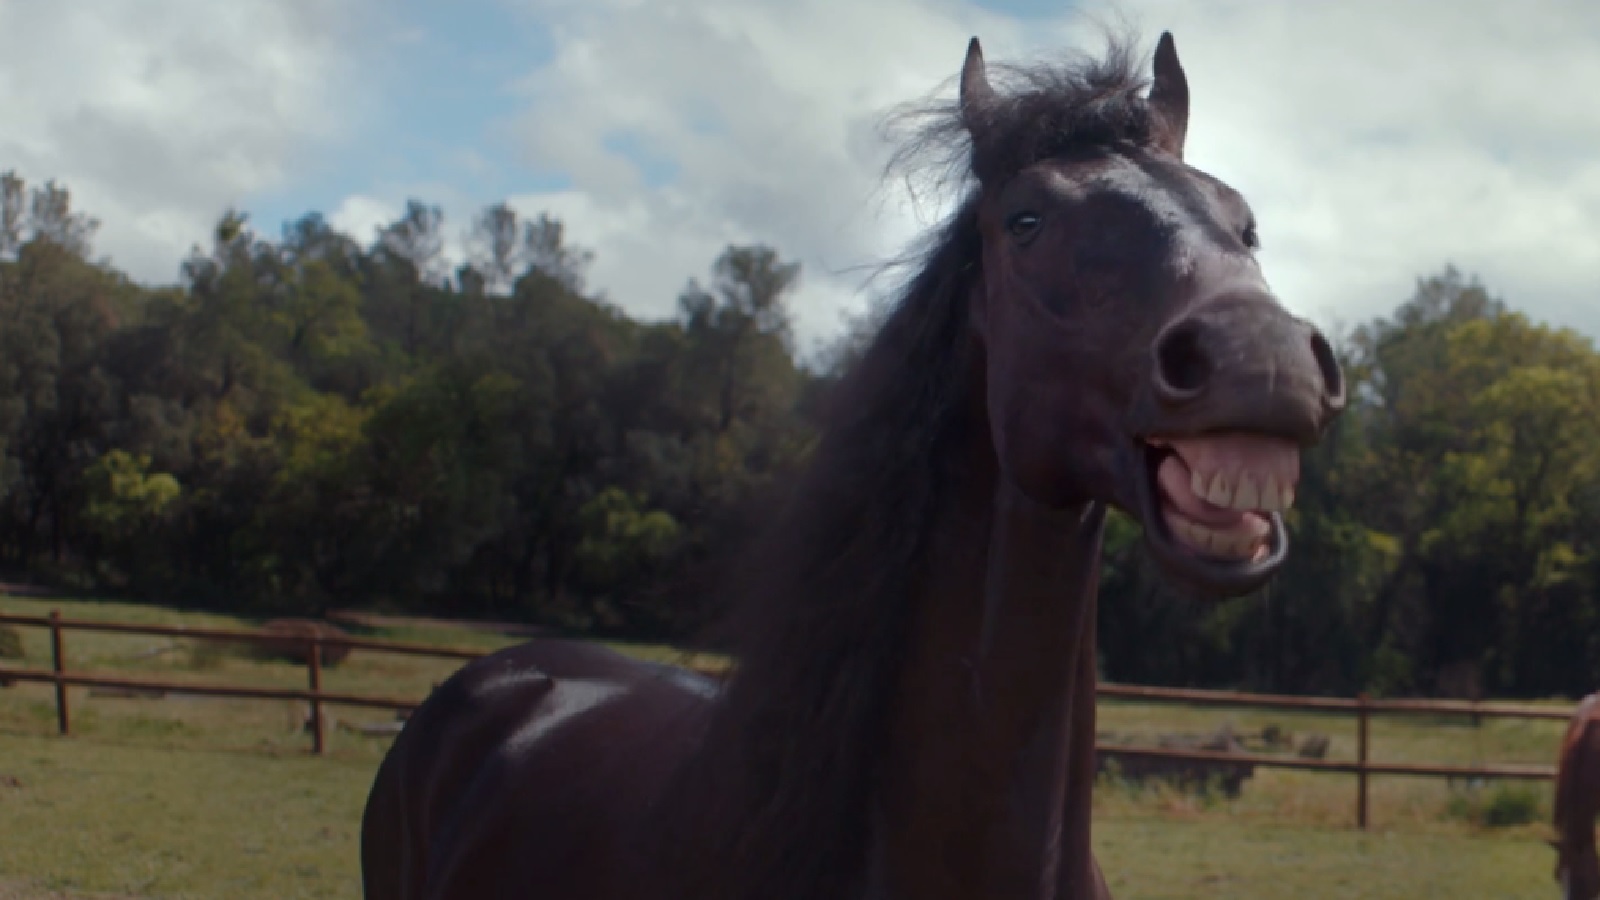 #TBT: You Wouldn’t Want to Park During Such Contagious Horse Laughter